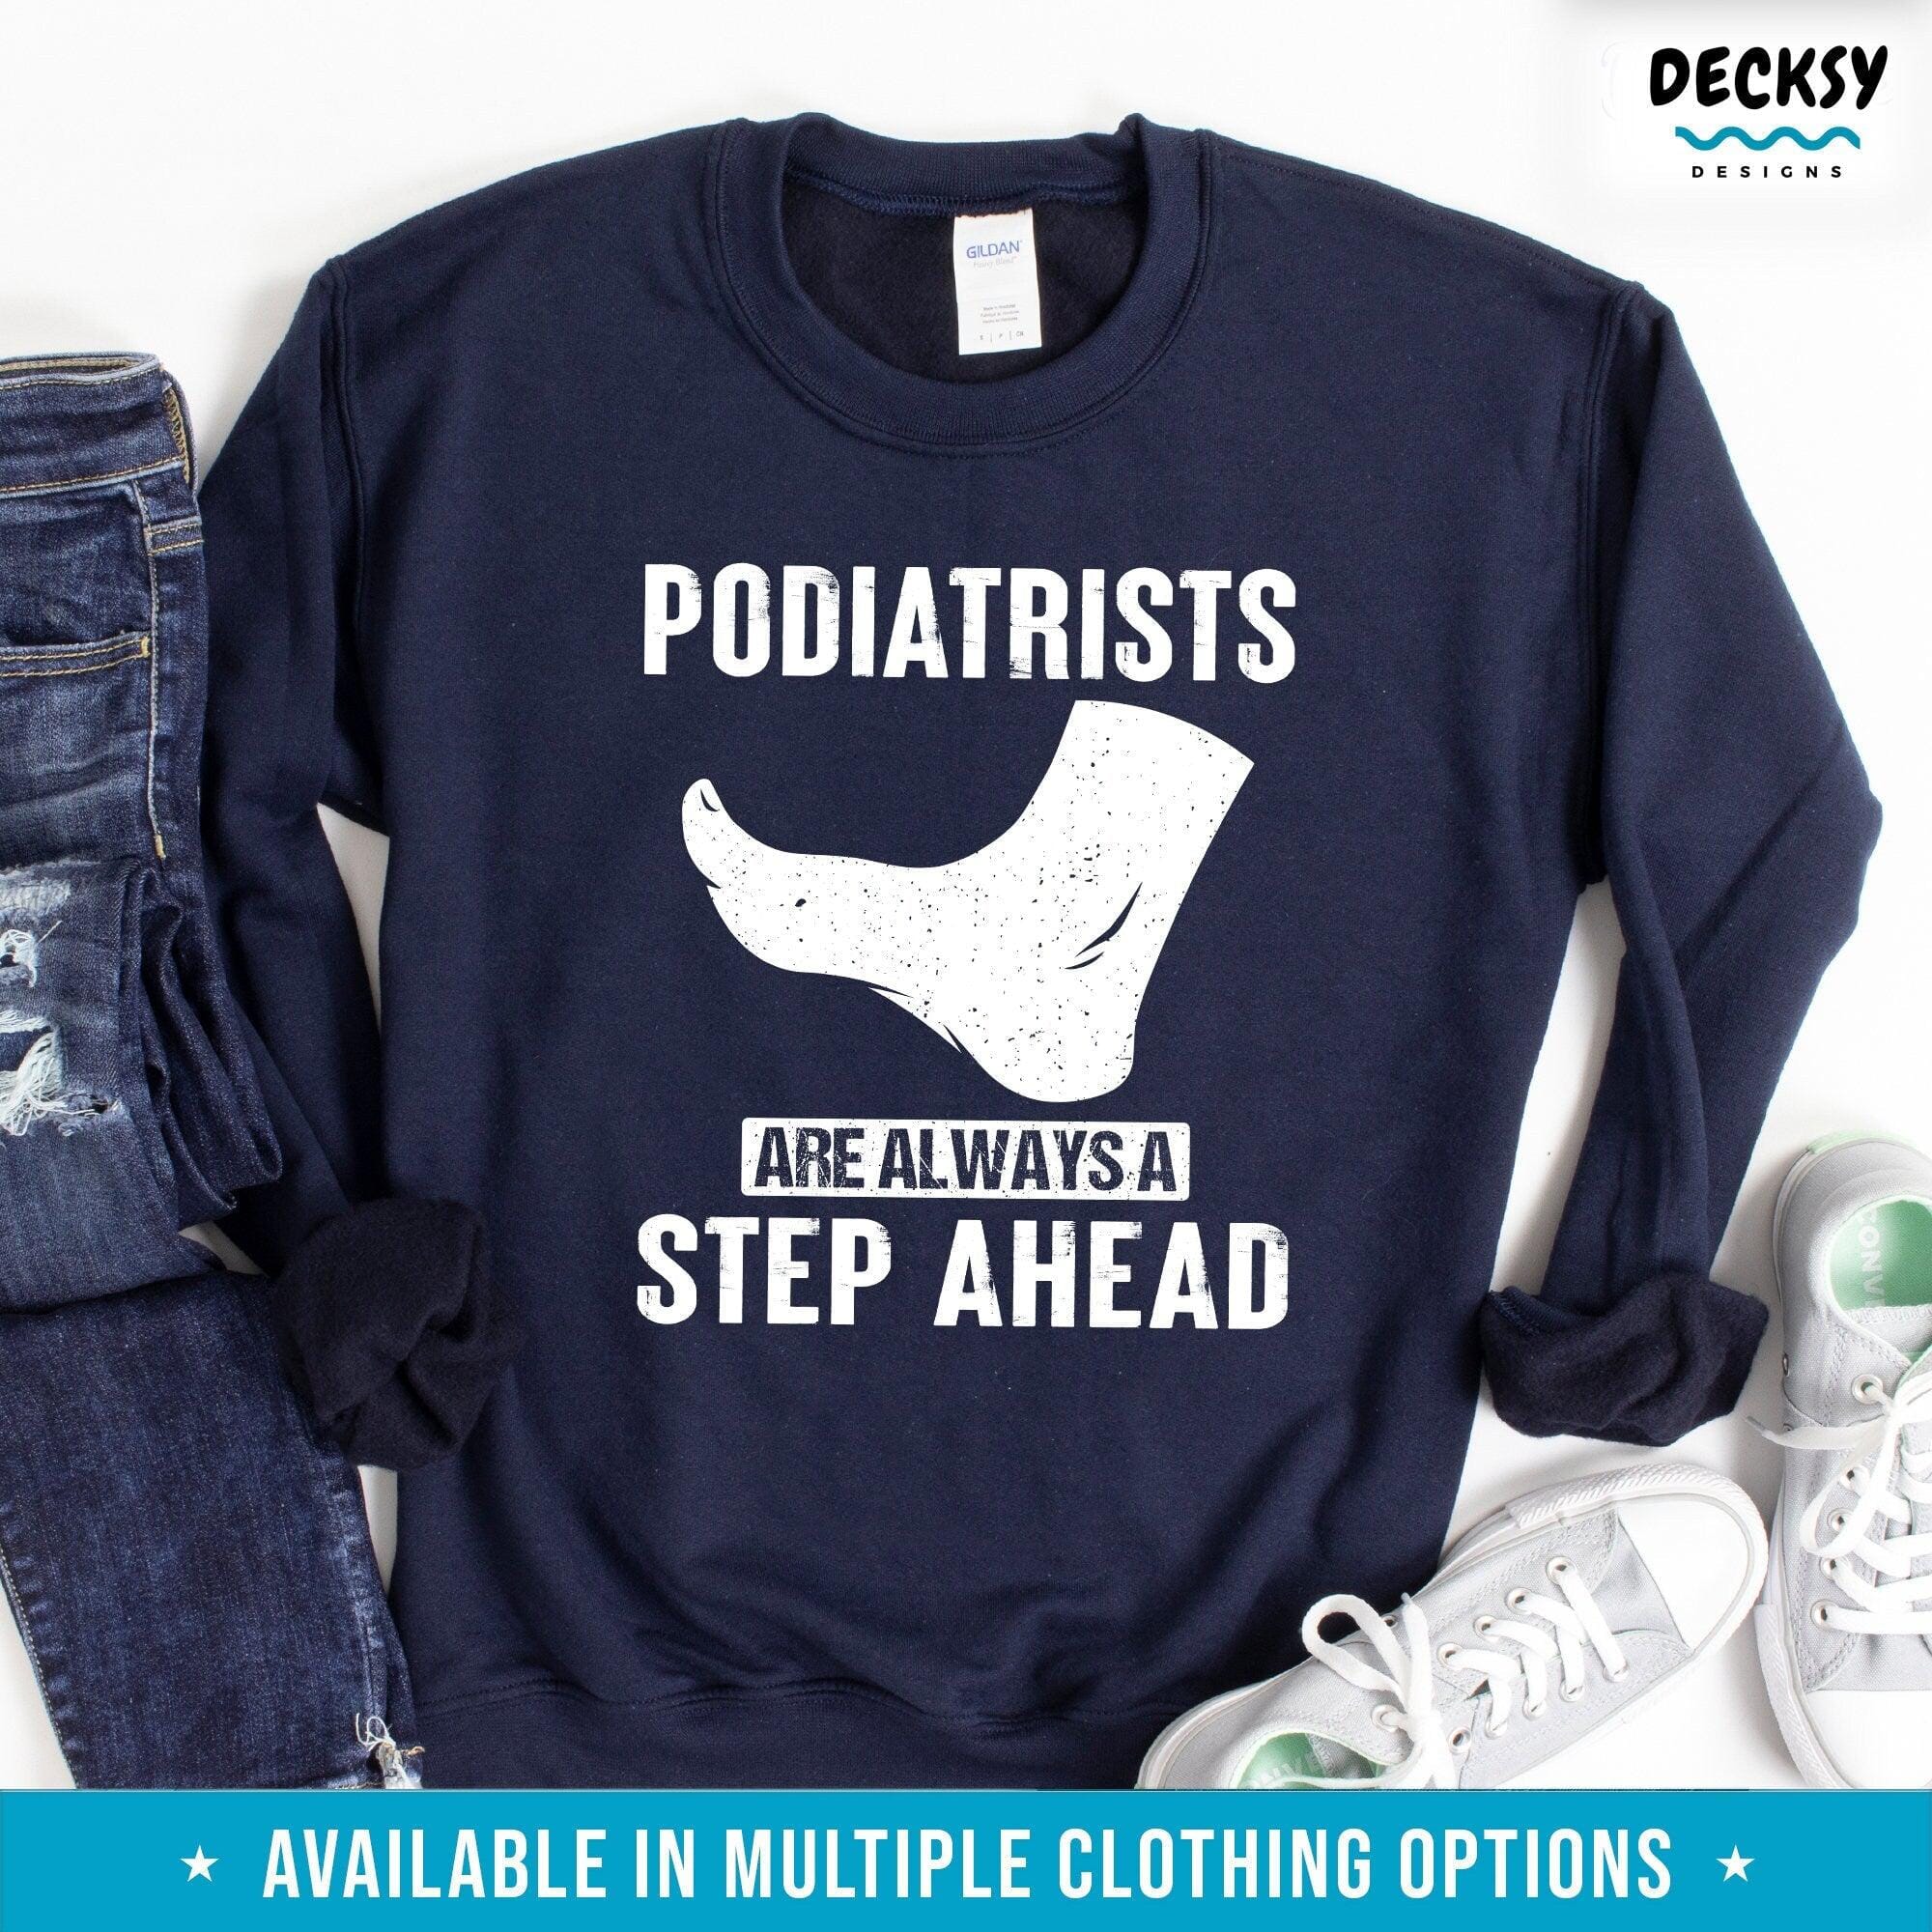 Podiatrist Shirt, Podiatric Doctor Gift-Clothing:Gender-Neutral Adult Clothing:Tops & Tees:T-shirts:Graphic Tees-DecksyDesigns